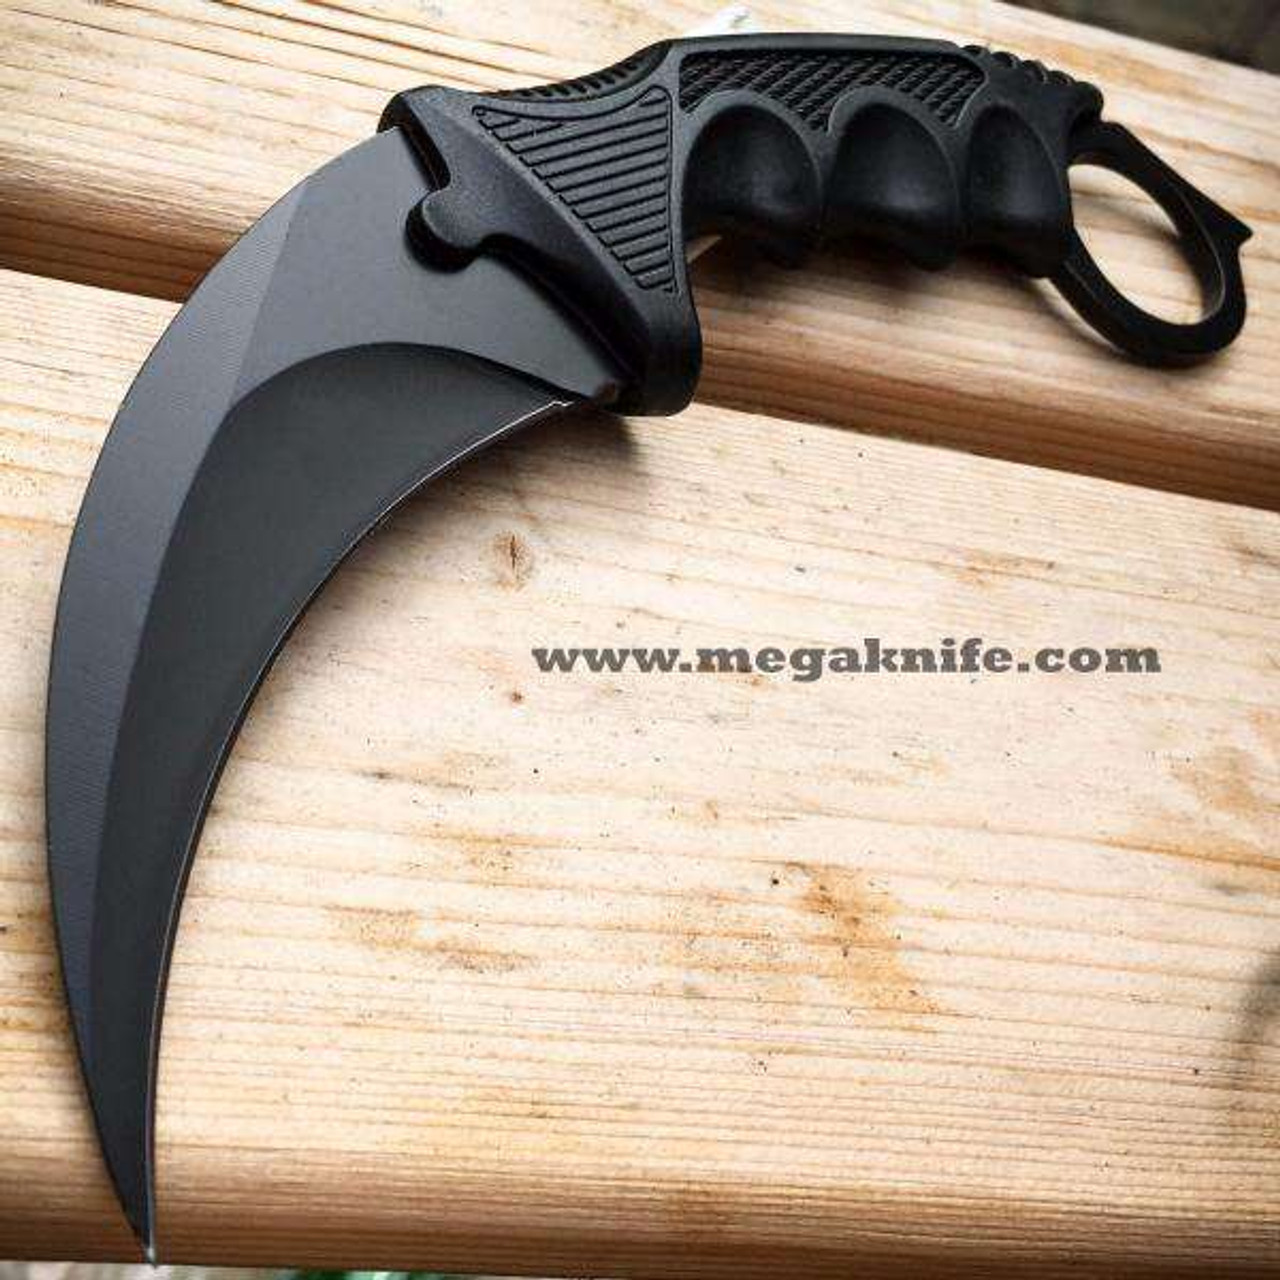 3 - pc. Tactical, Hunting, and Karambit Knife Set Collection - Night Sky